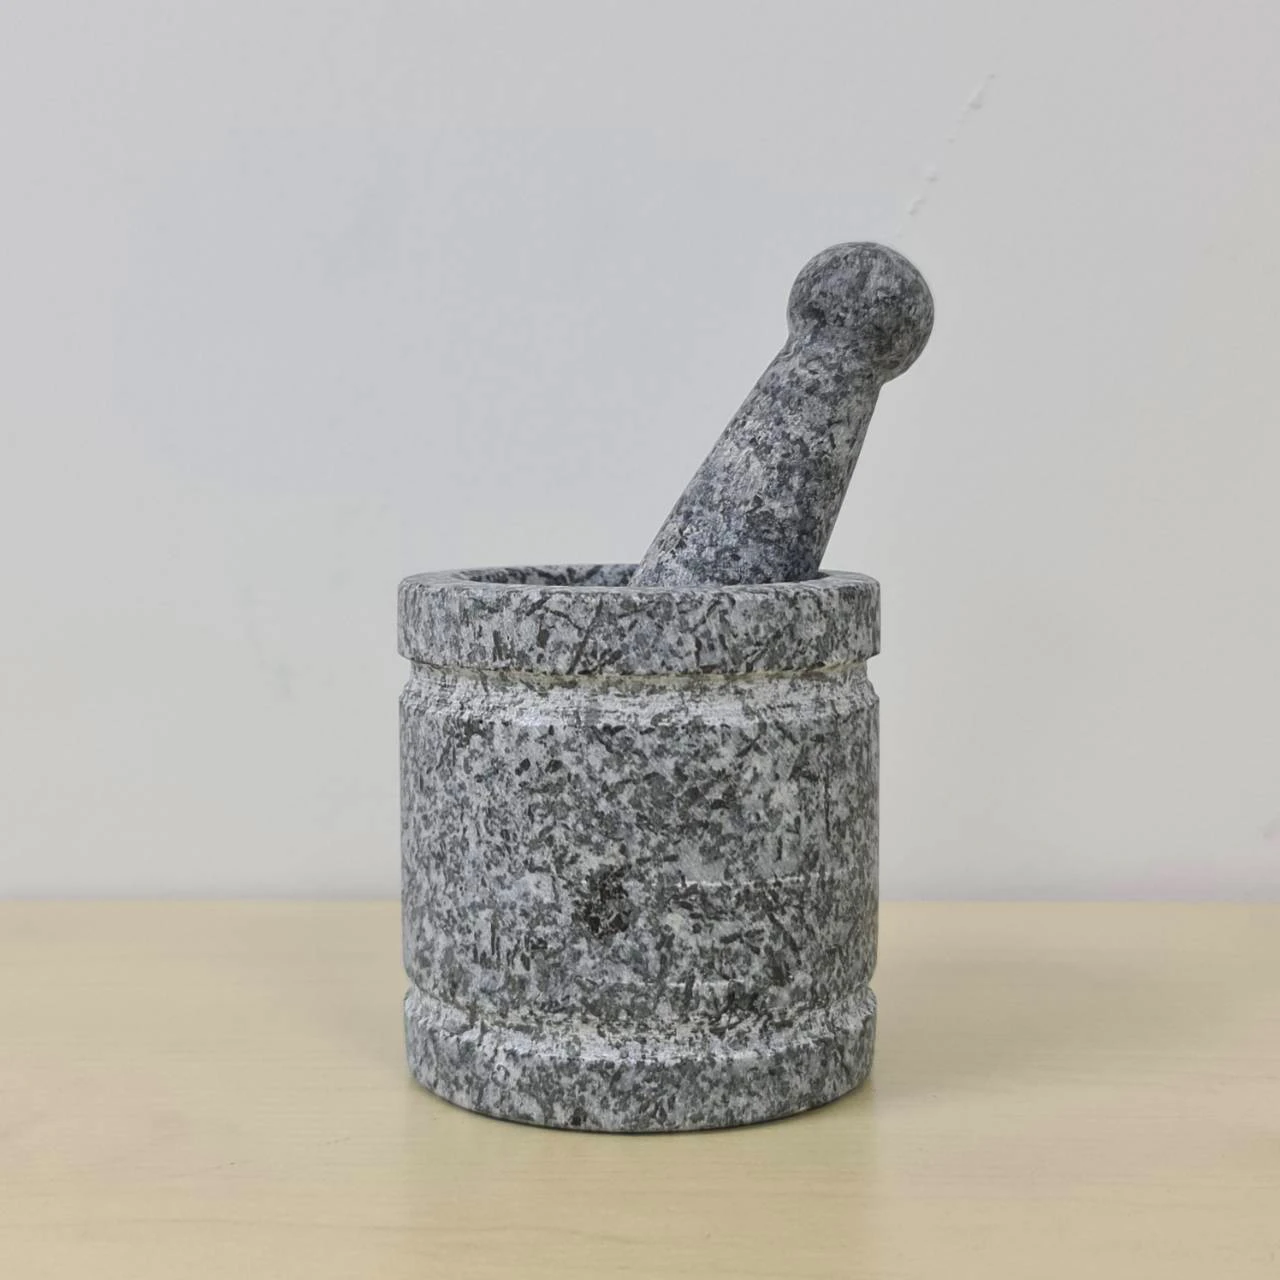 Cylindrical Mortar 2.5 inches